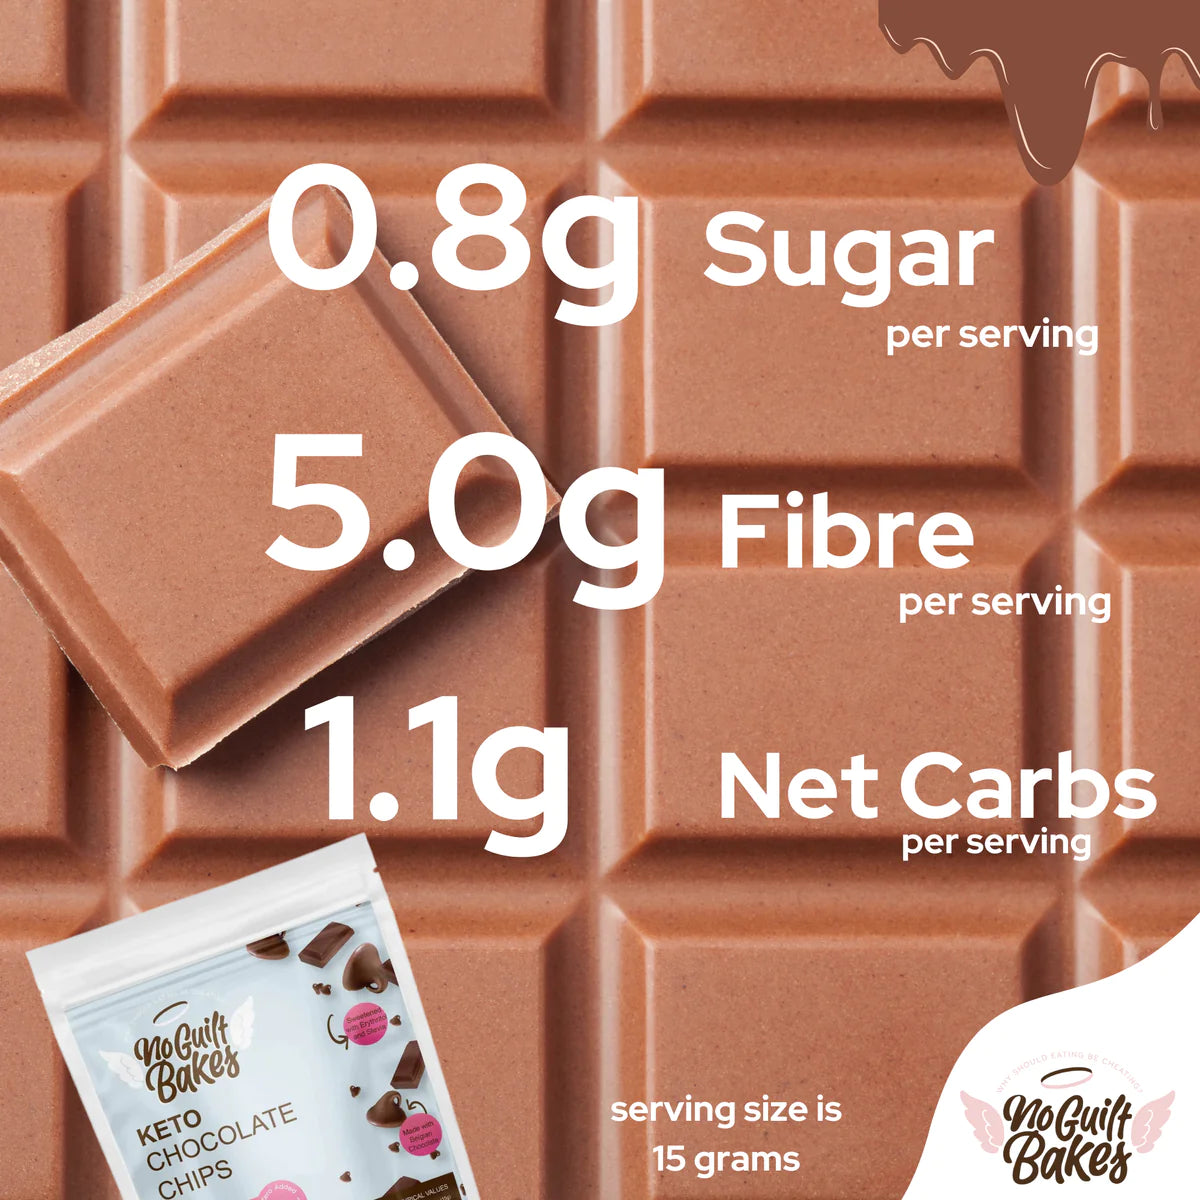 An indulgent bar of guilt-free No Guilt Bakes Belgian Chocolate Chips Bundle neatly packaged with a label, perfect for an enjoyable treat.